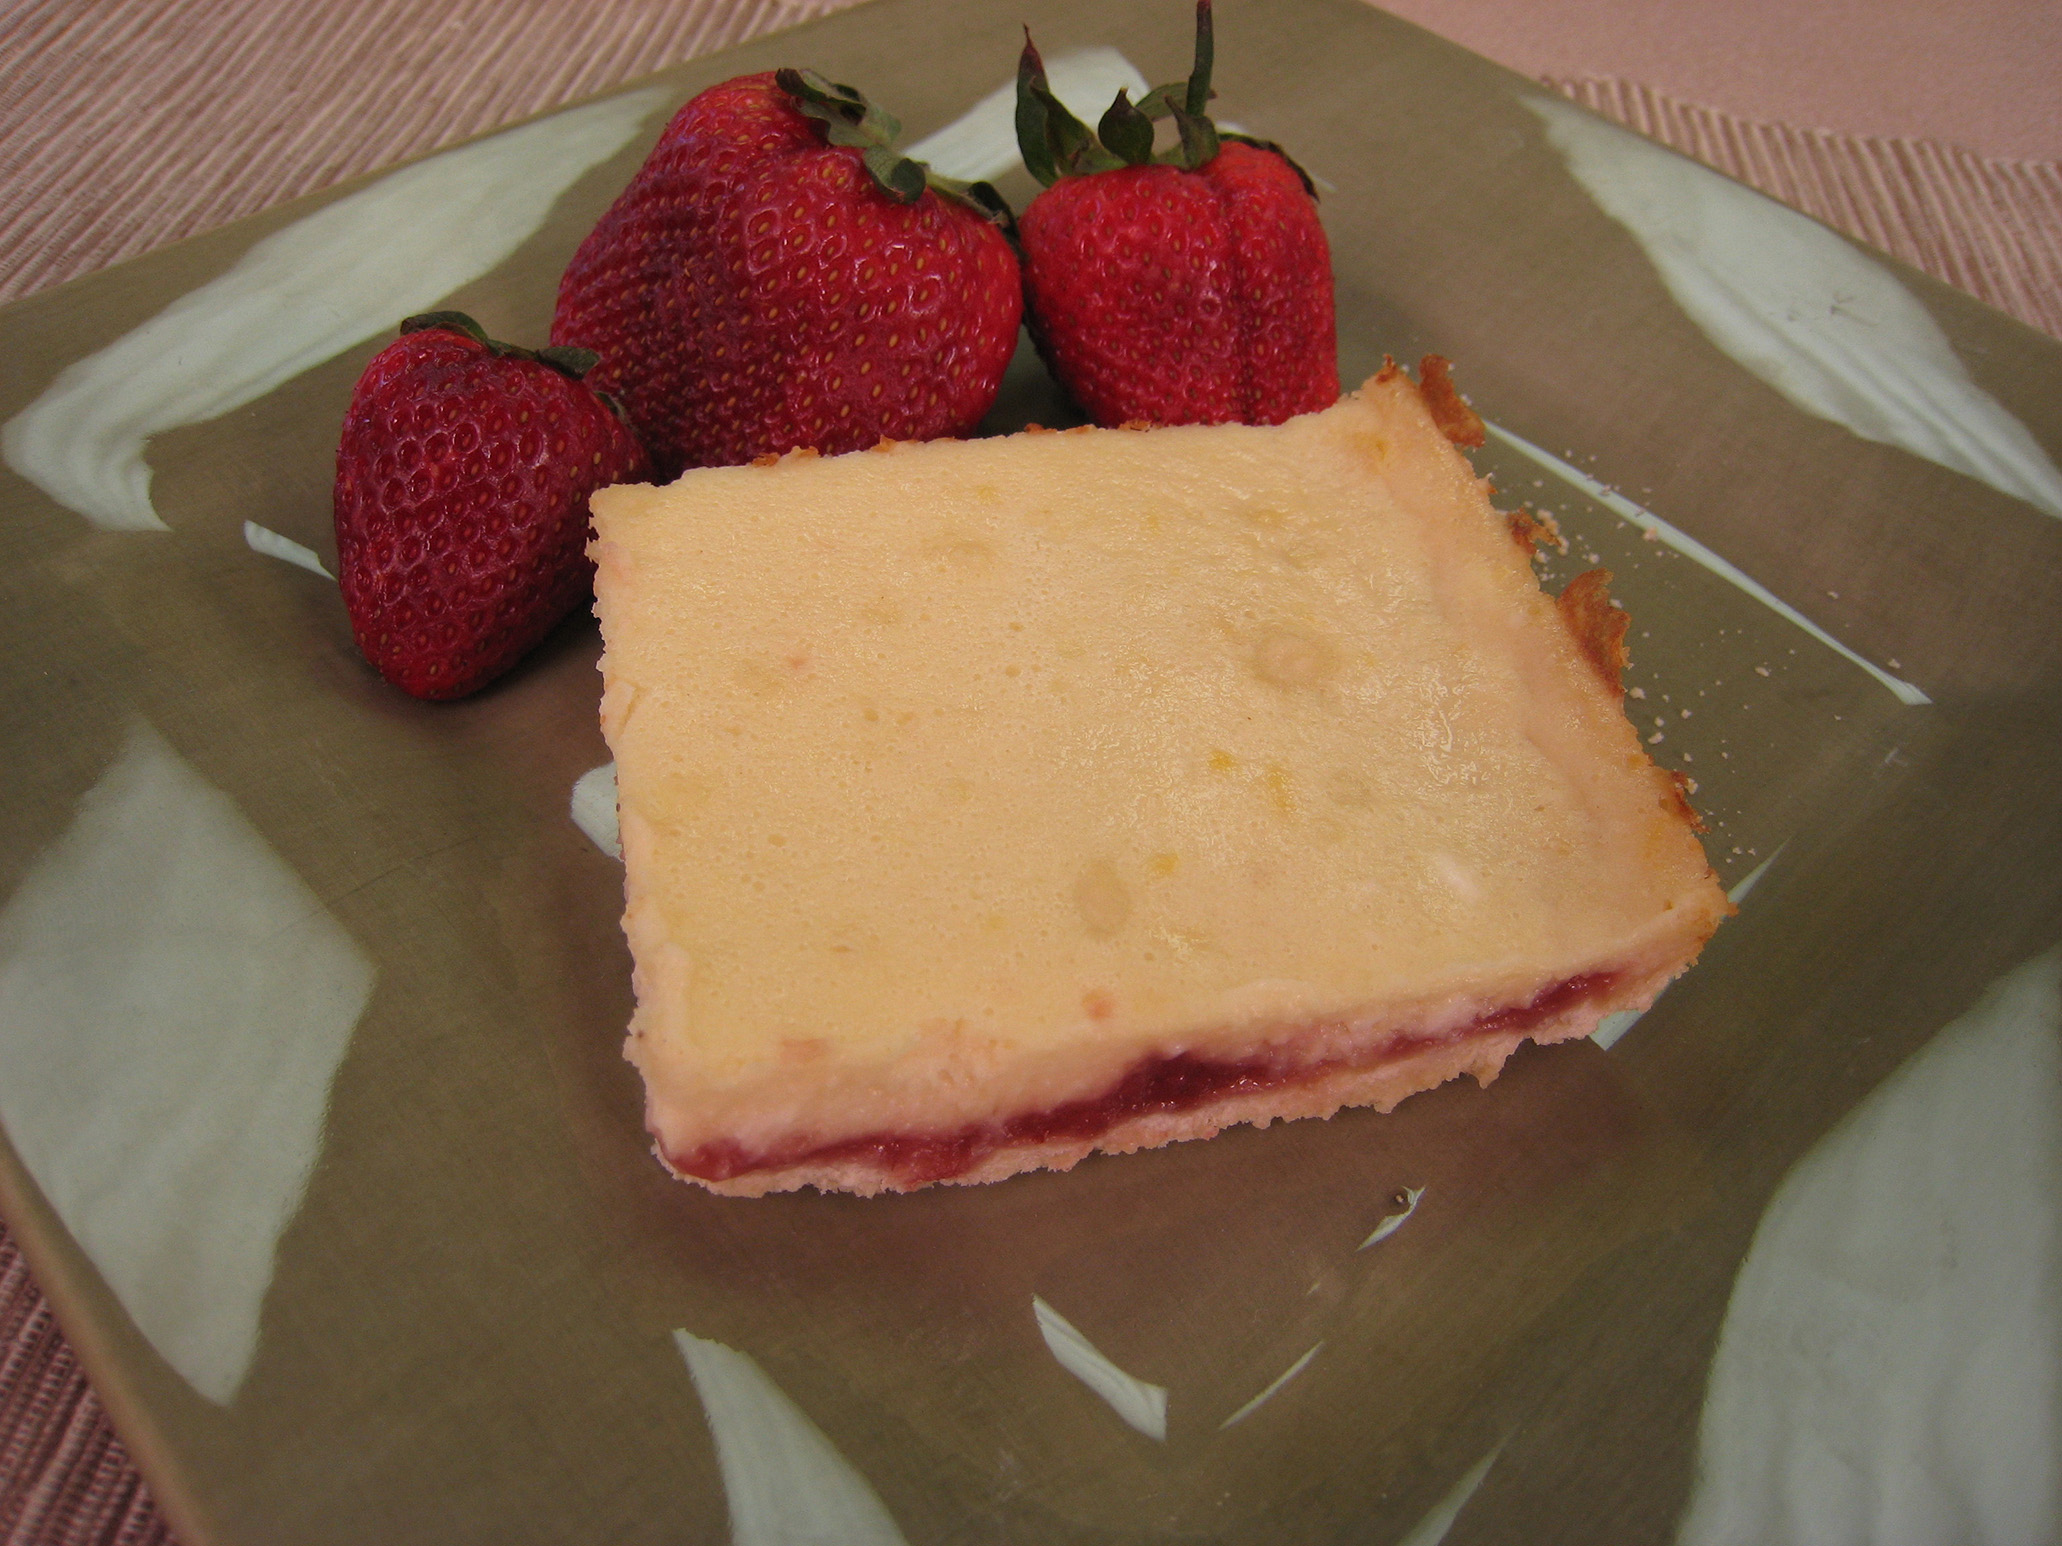 Strawberry lemon bar served on a plate with fresh strawberries.